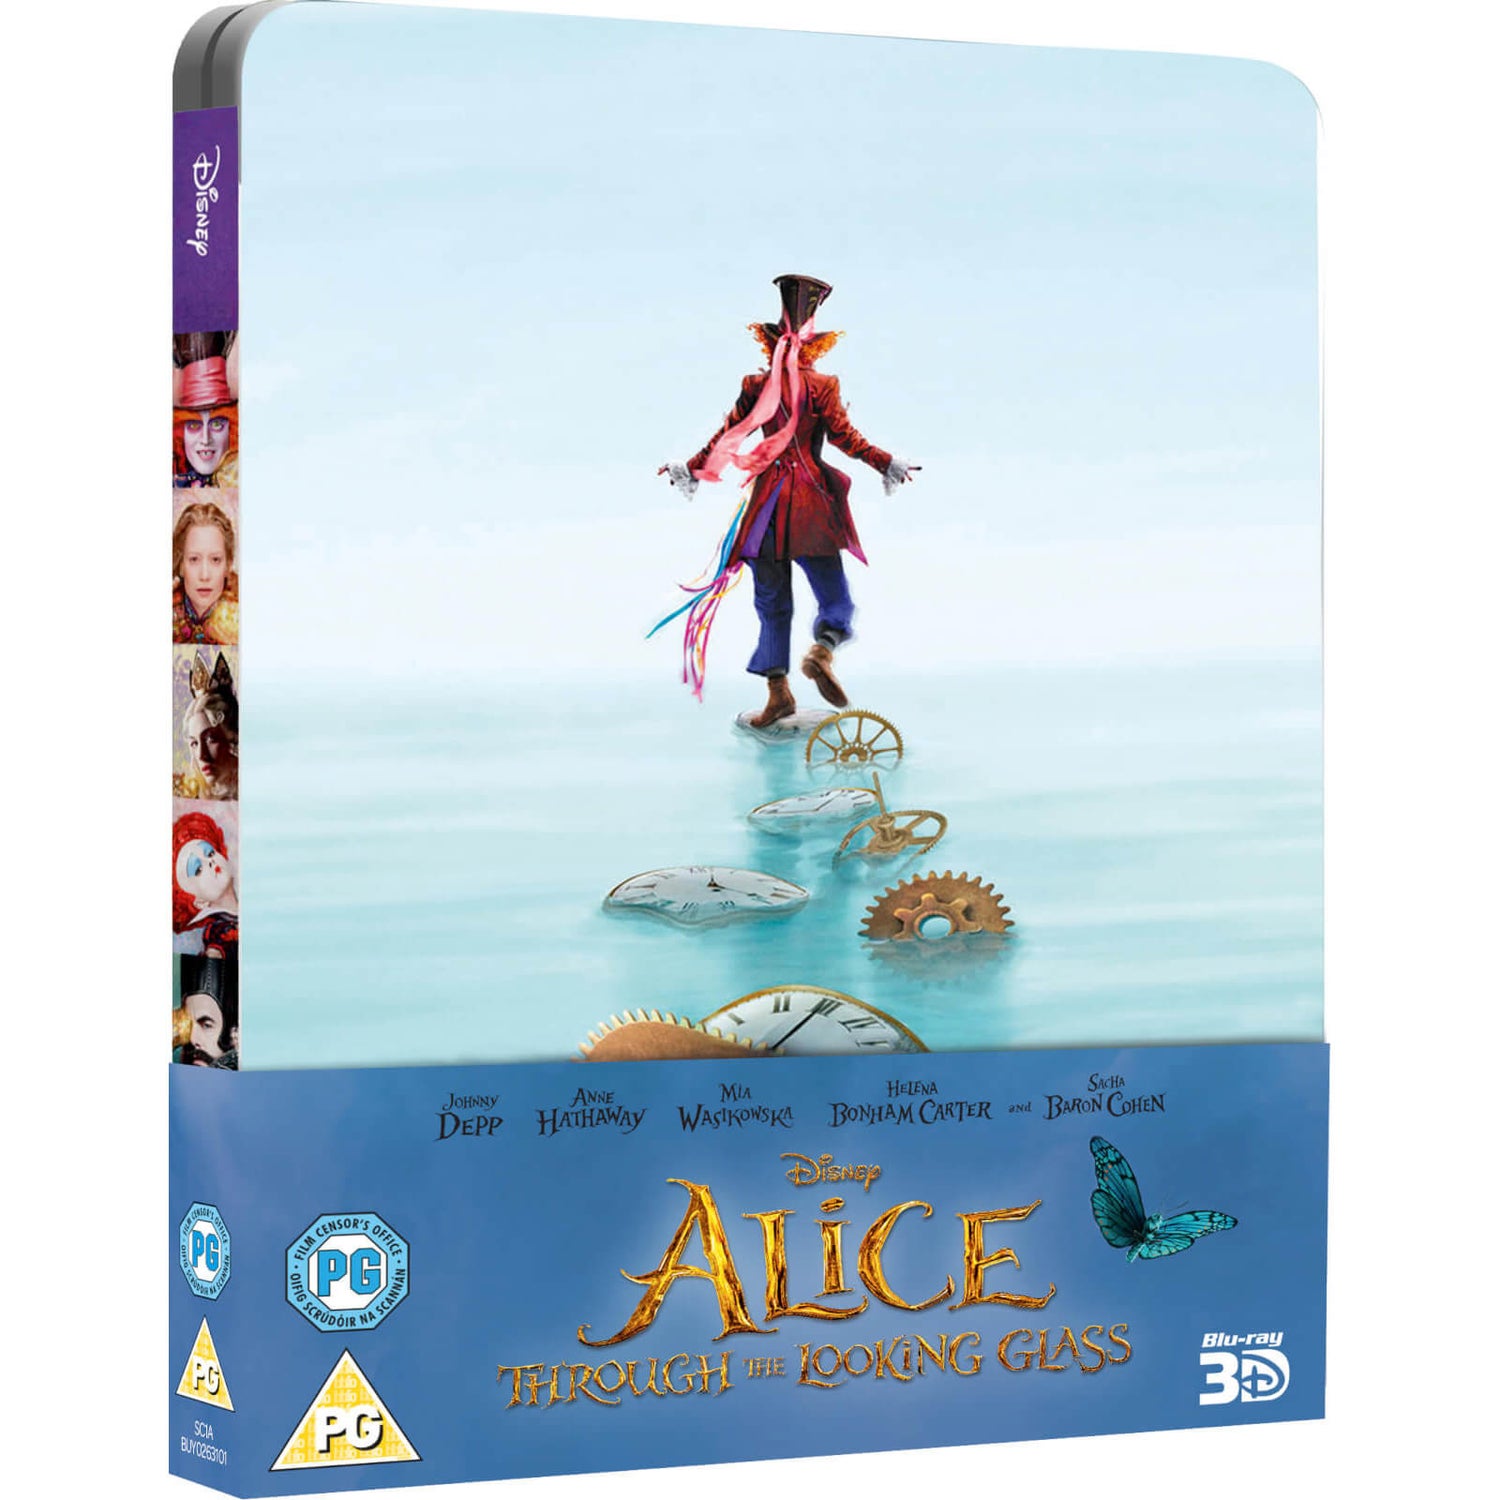 Alice Through The Looking Glass 3D (Includes 2D Version) - Zavvi Exclusive Limited Edition Steelbook